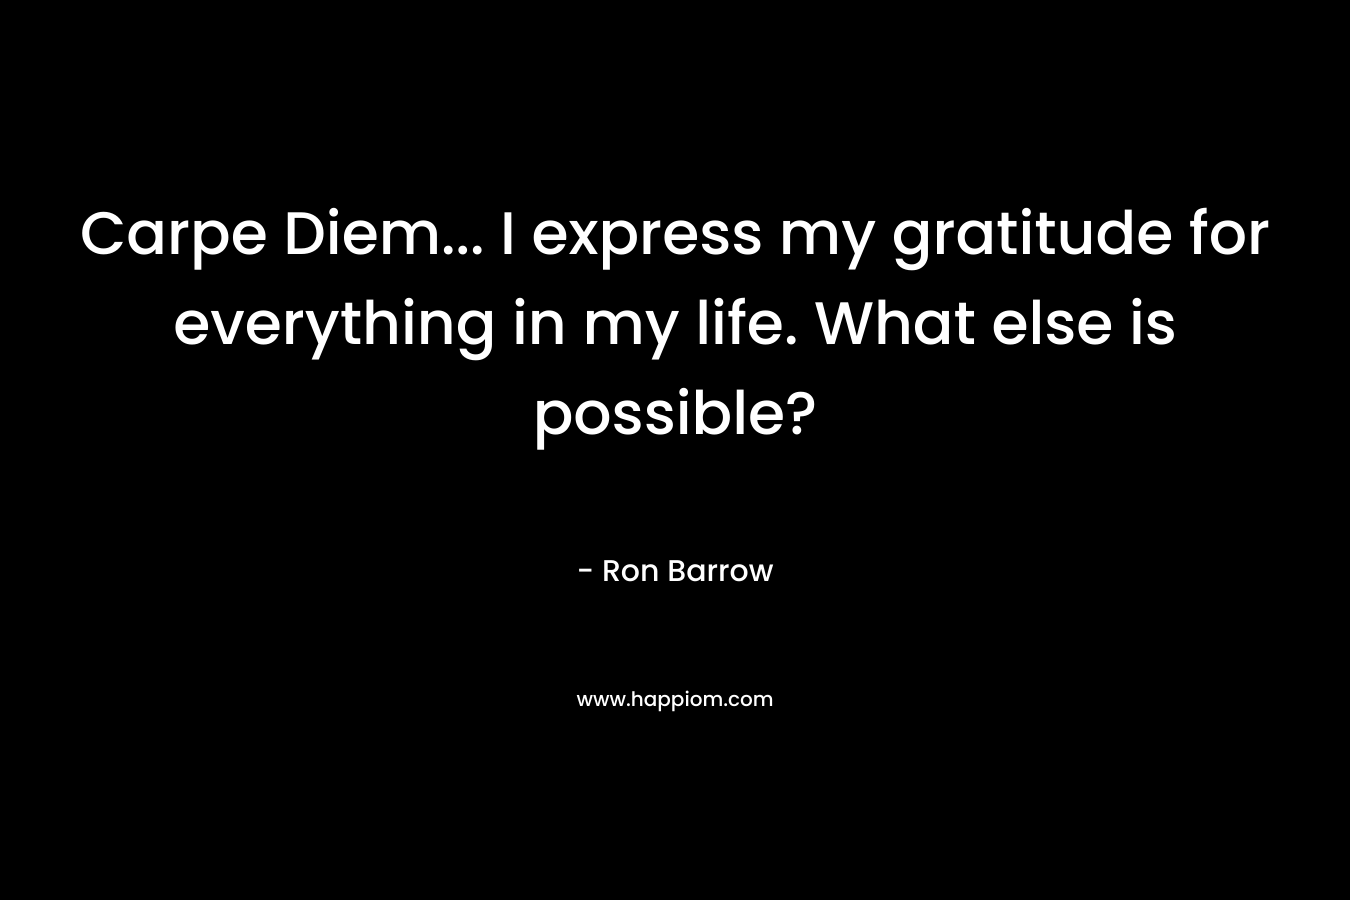 Carpe Diem... I express my gratitude for everything in my life. What else is possible?